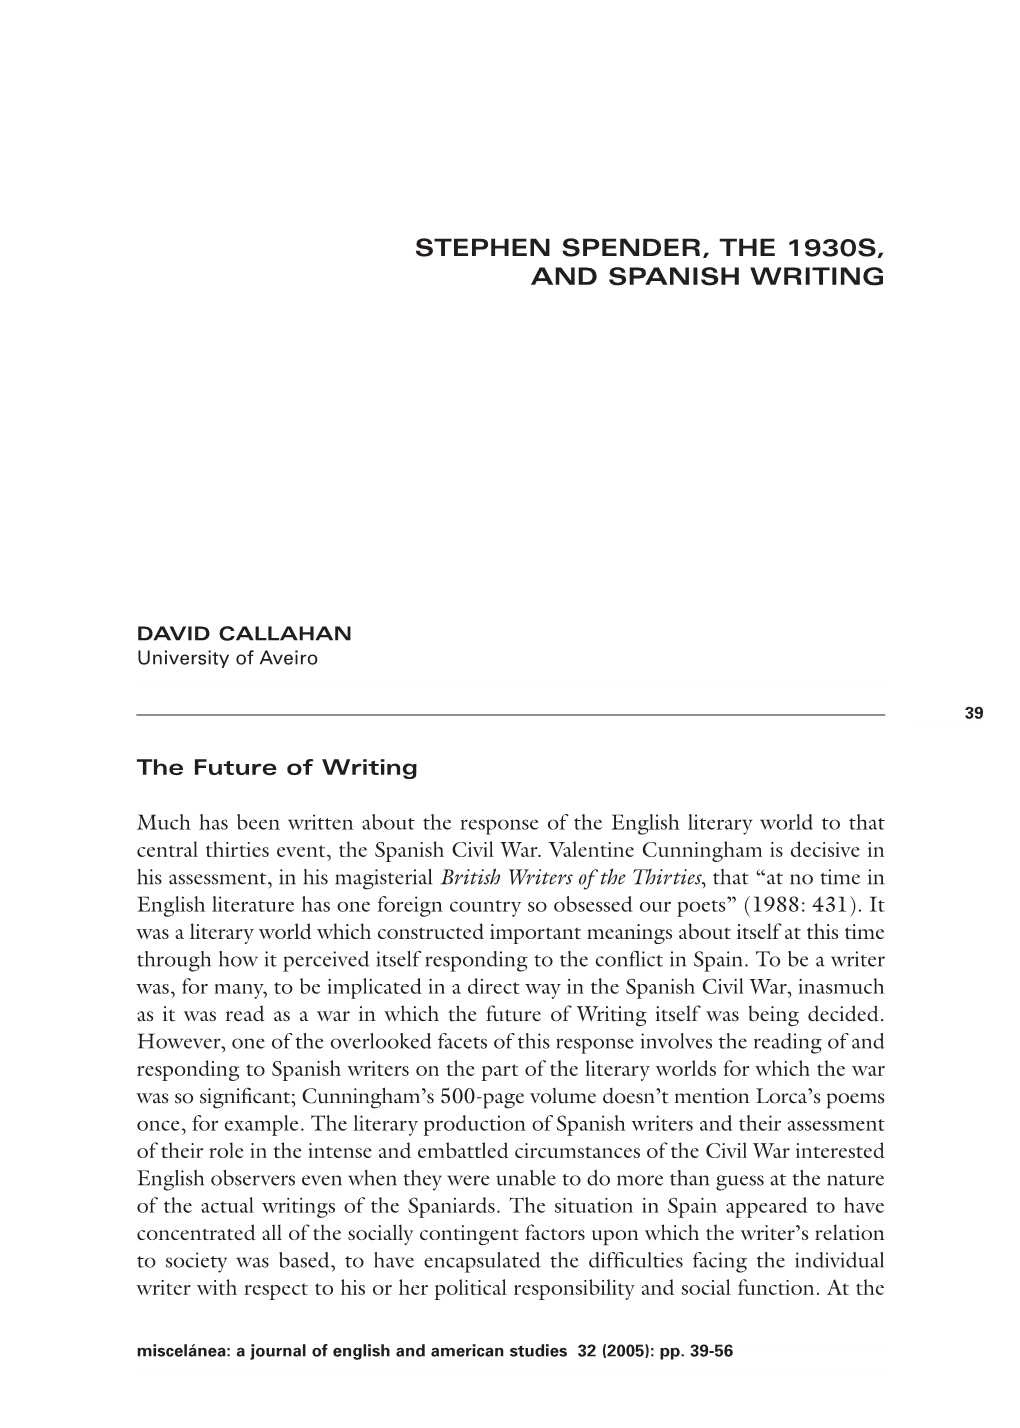 Stephen Spender, the 1930S, and Spanish Writing